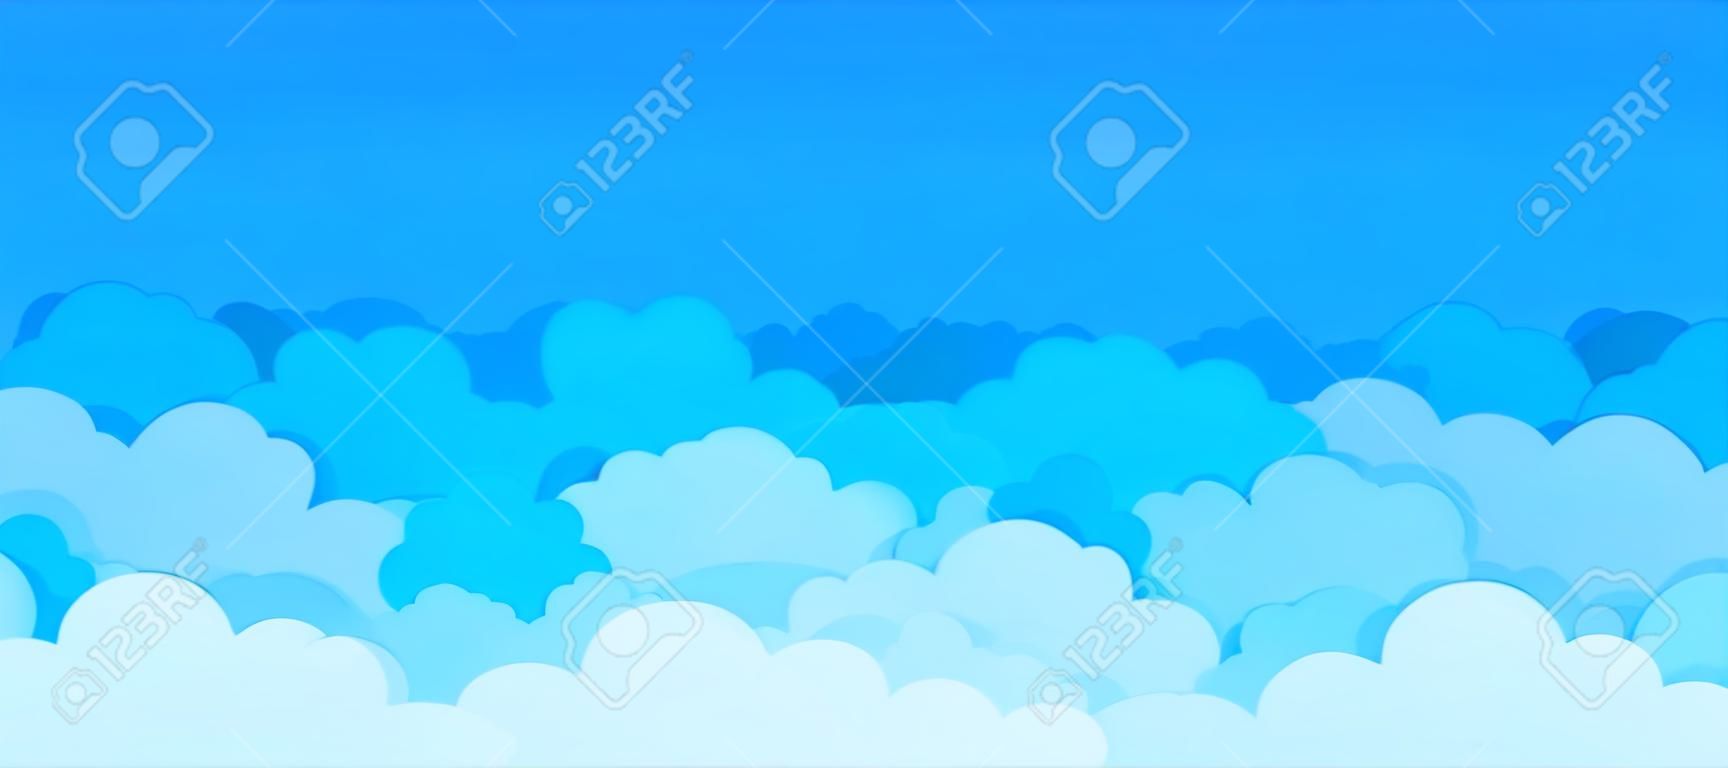 Cloud flat background. Cartoon blue sky pattern abstract cloudy frame cloudy summer poster scene. Vector clouds graphic wallpaper